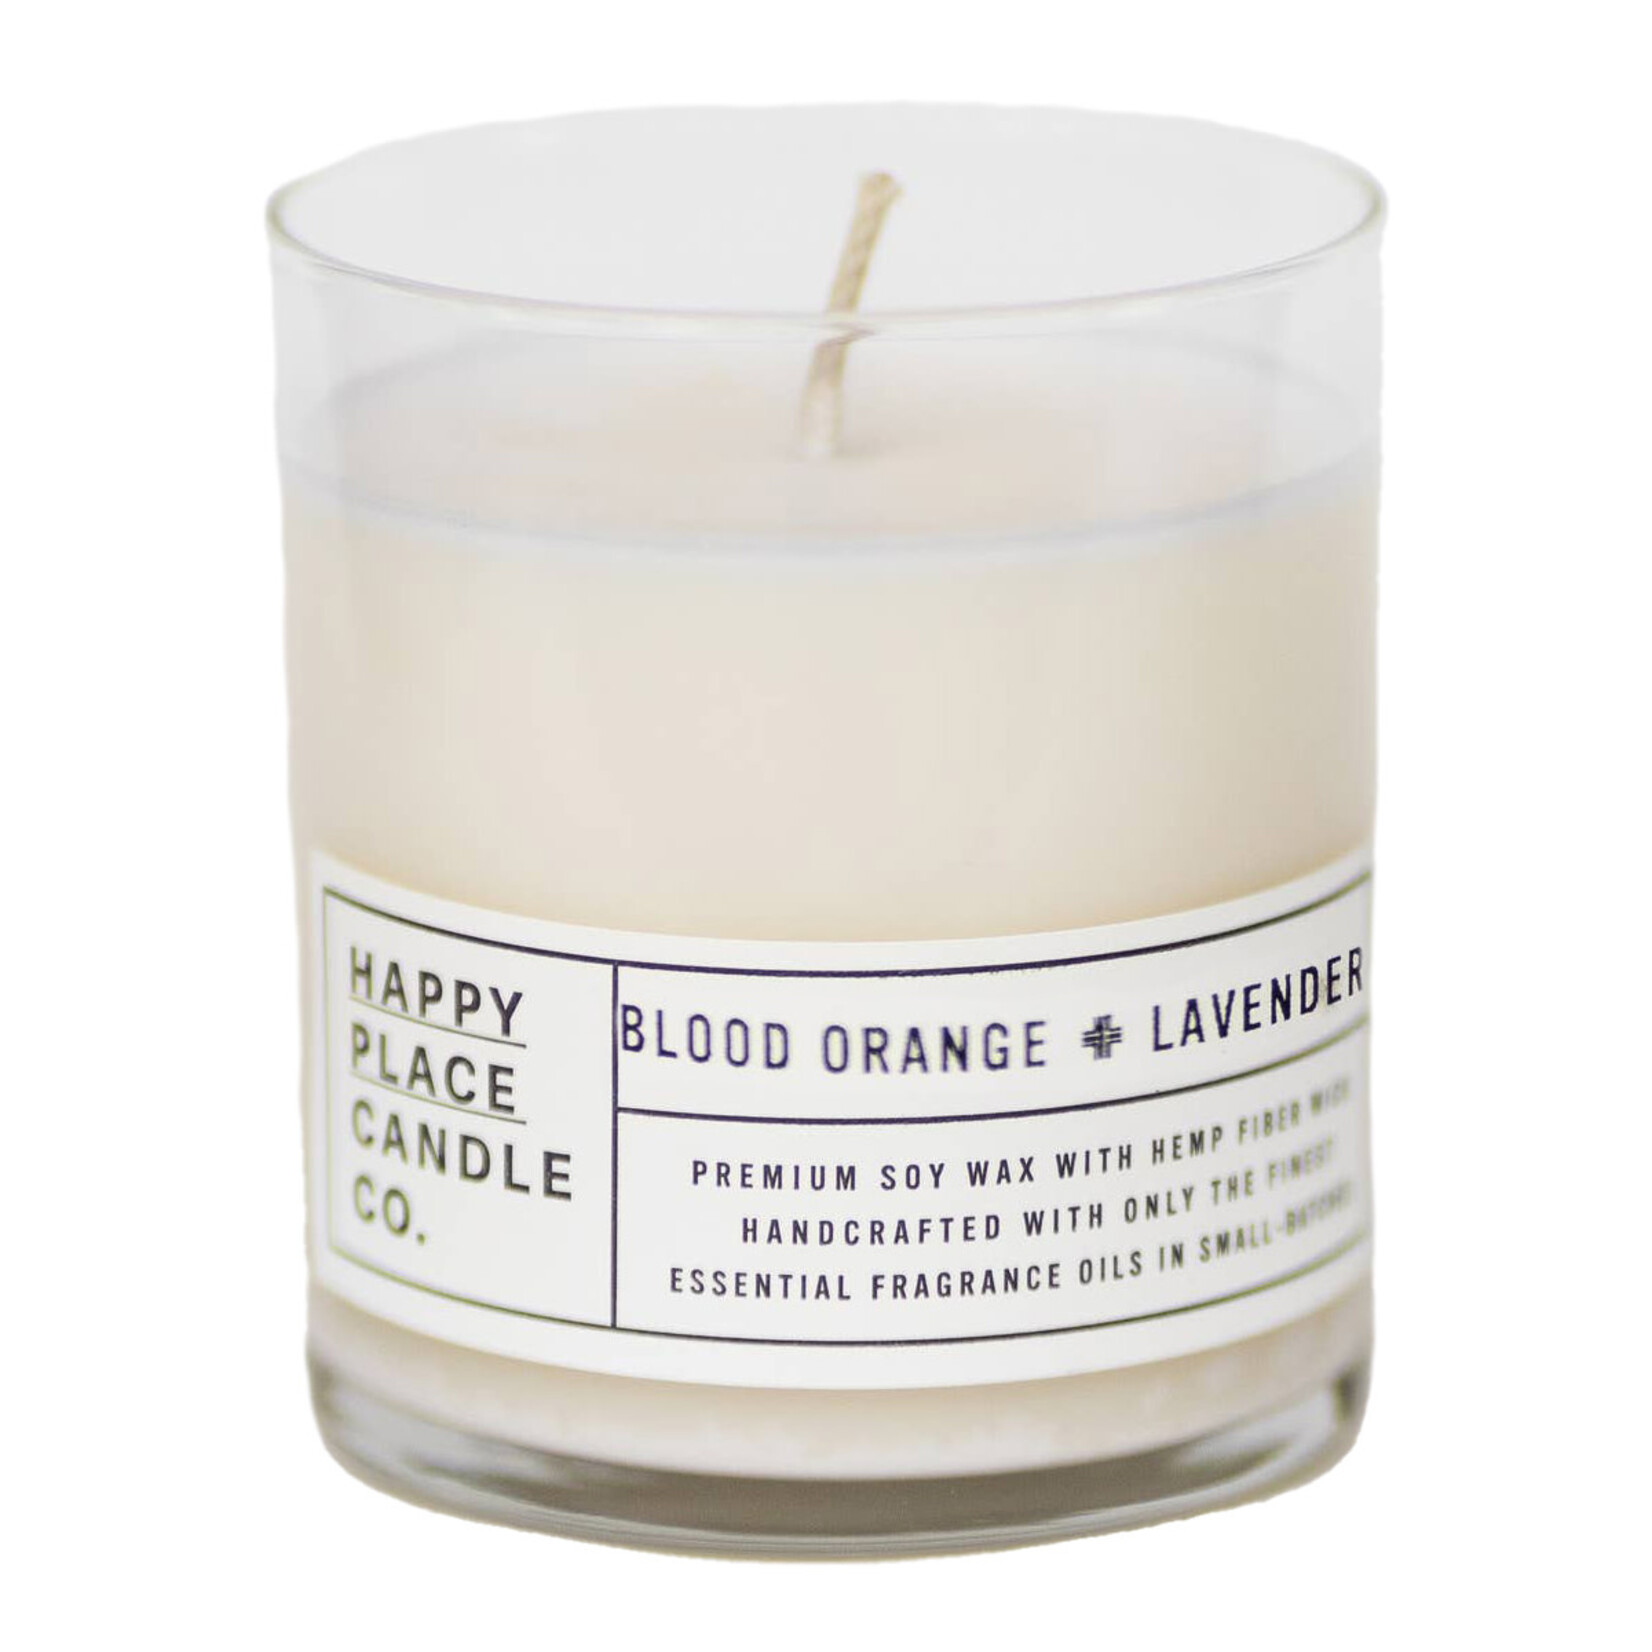 happy place candle co. blood orange + lavender candle